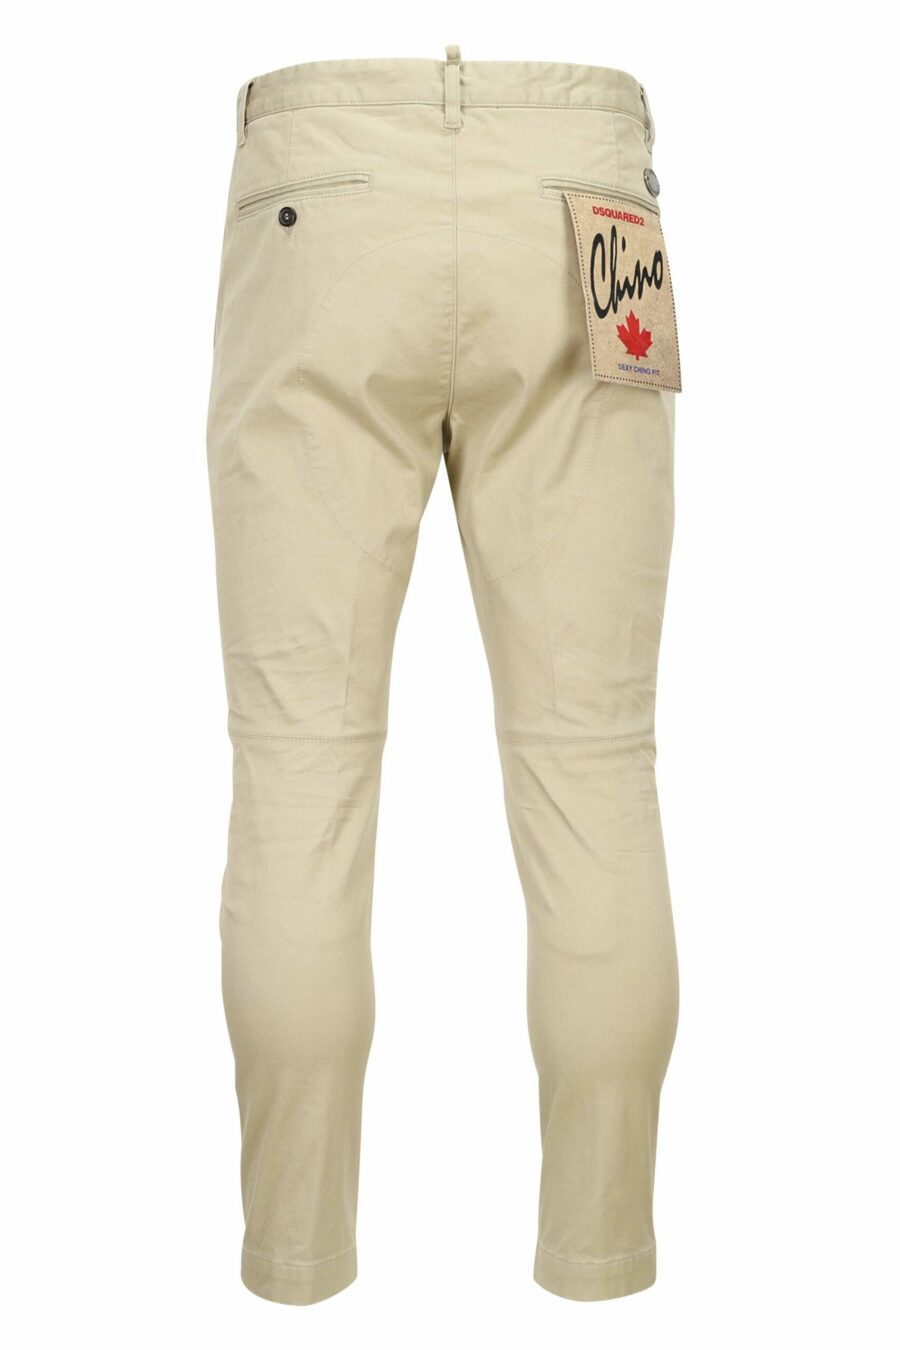 Beige "sexy chino pant" with mini-logo - 8052134973257 2 scaled